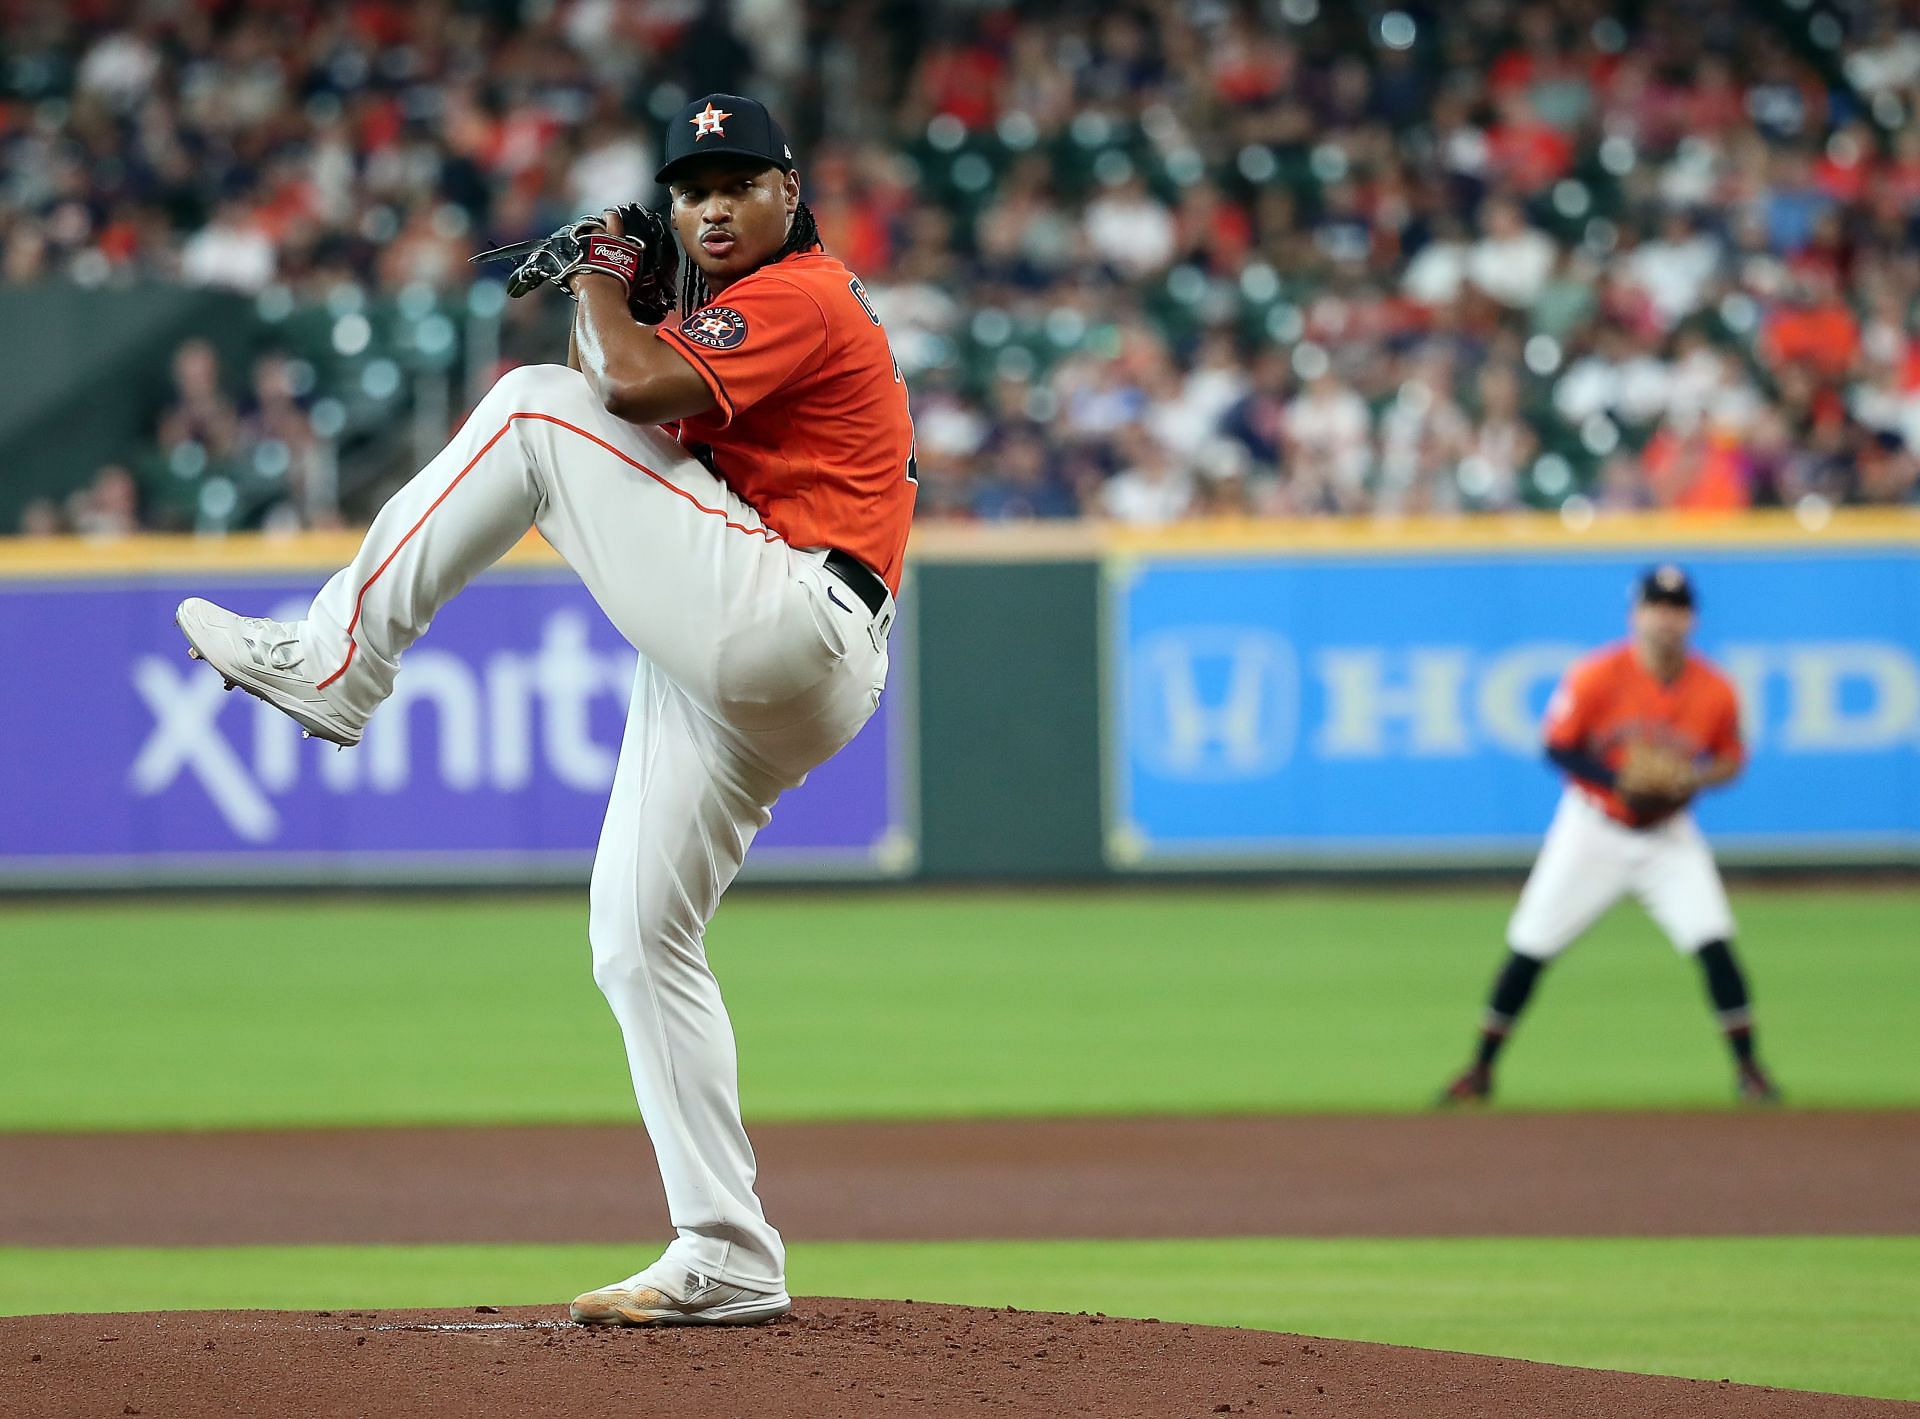 The Astros pitch two immaculate innings against the Rangers